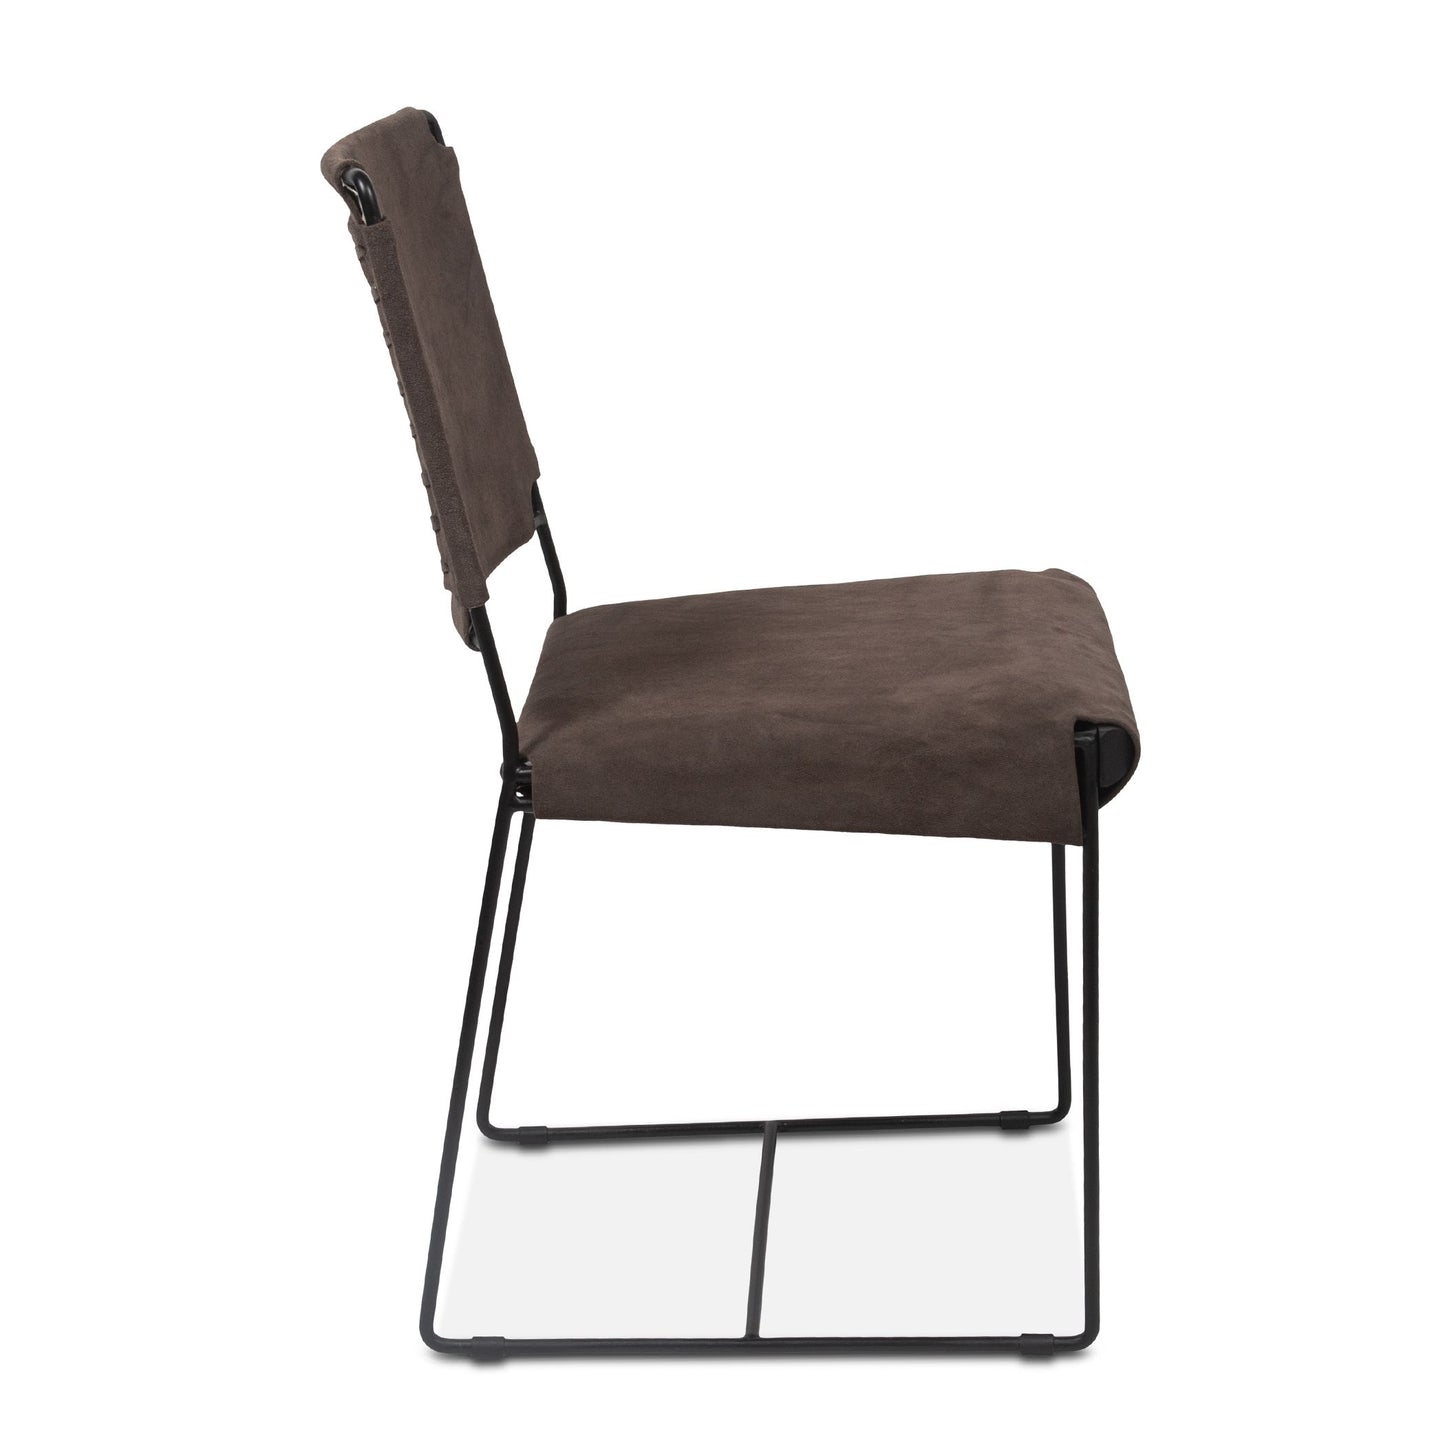 New York Iron and Asphalt Suede Dining Chair